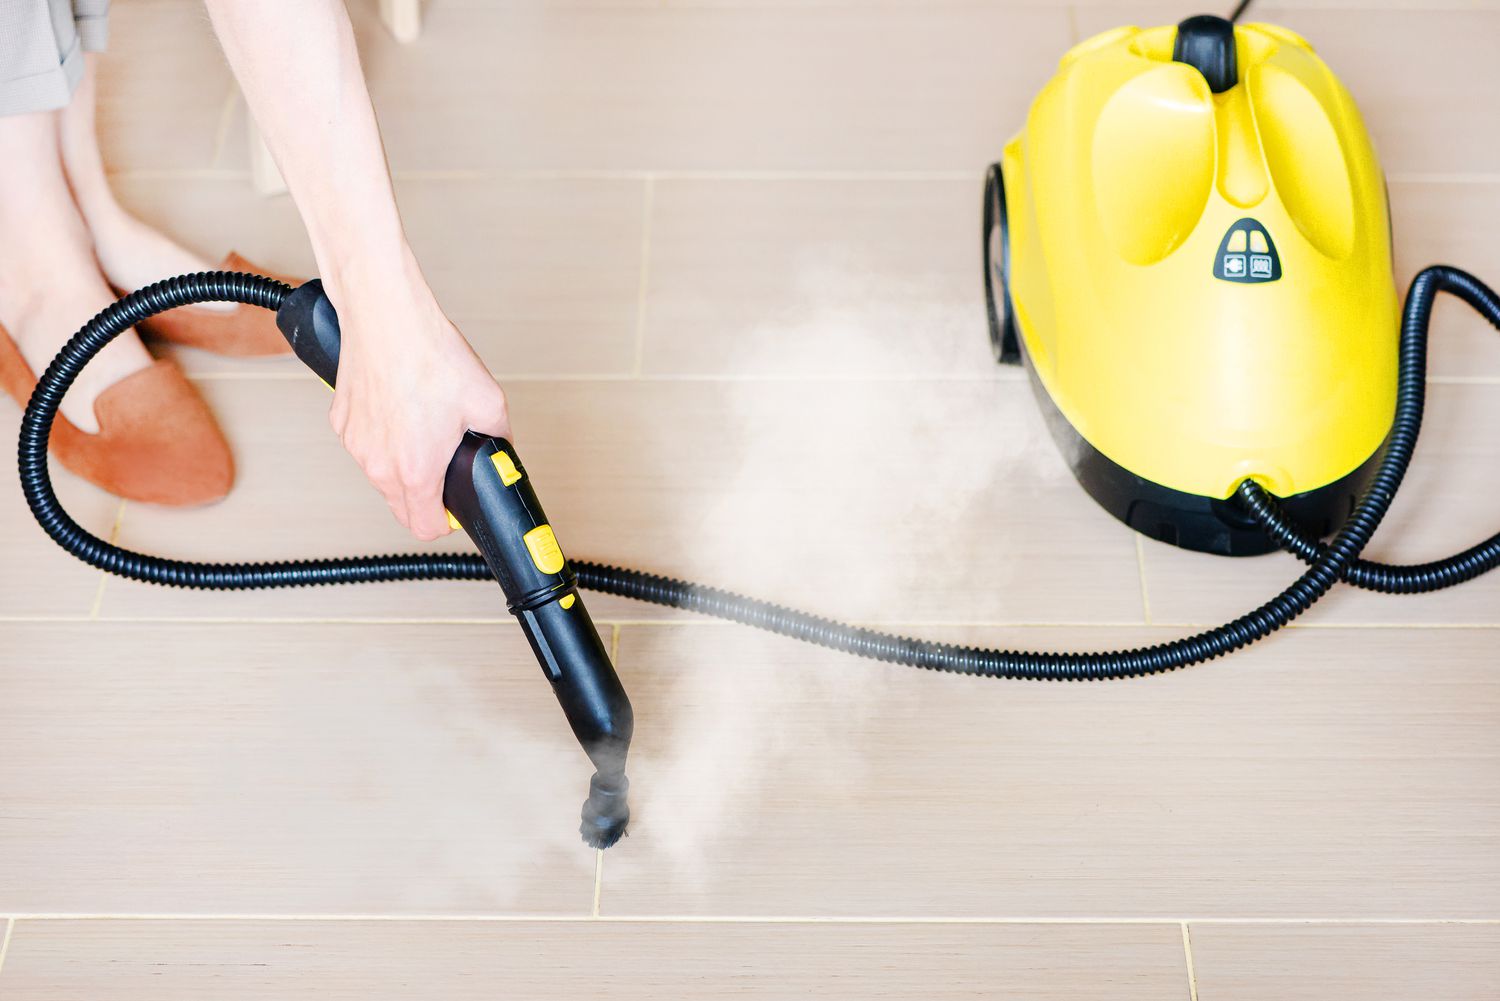 2800W High Pressure Steam Cleaner, Handheld Portable High Temperature Steam  Cleaning Machine for Kitchen Bathroom Grout Tile Furniture and Cars, with